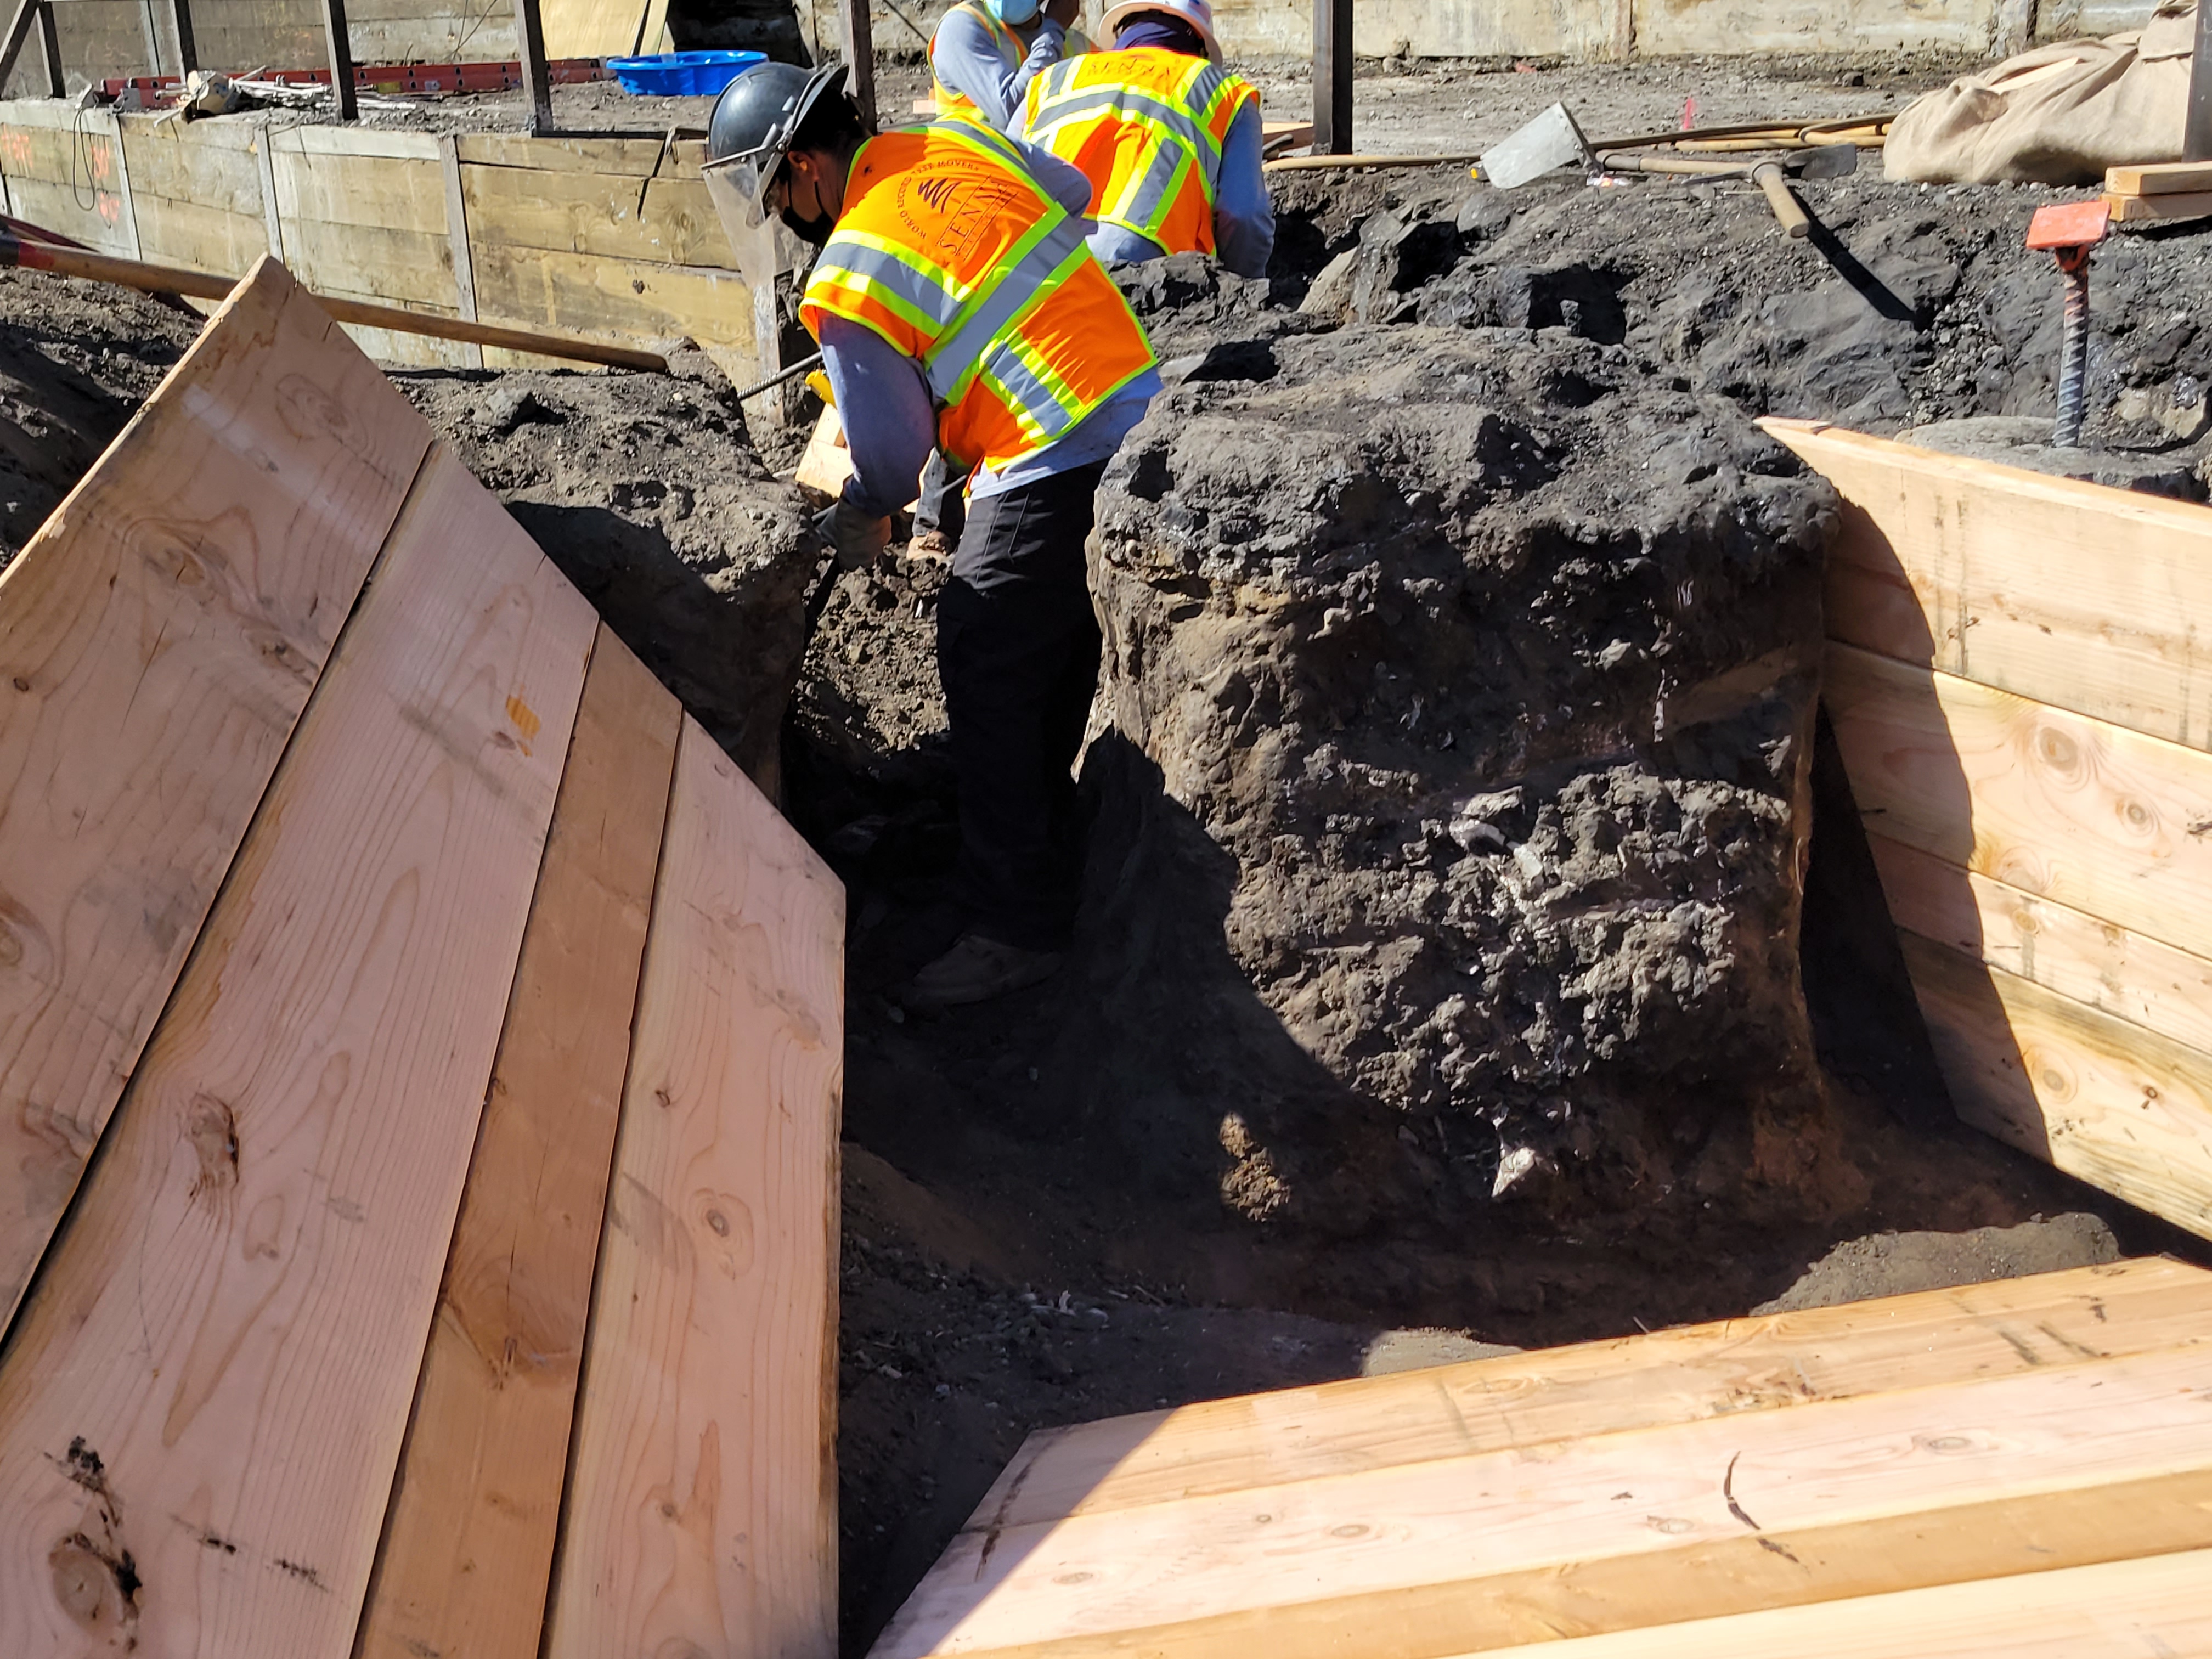 Large fossil deposit and planks of wood in construction site